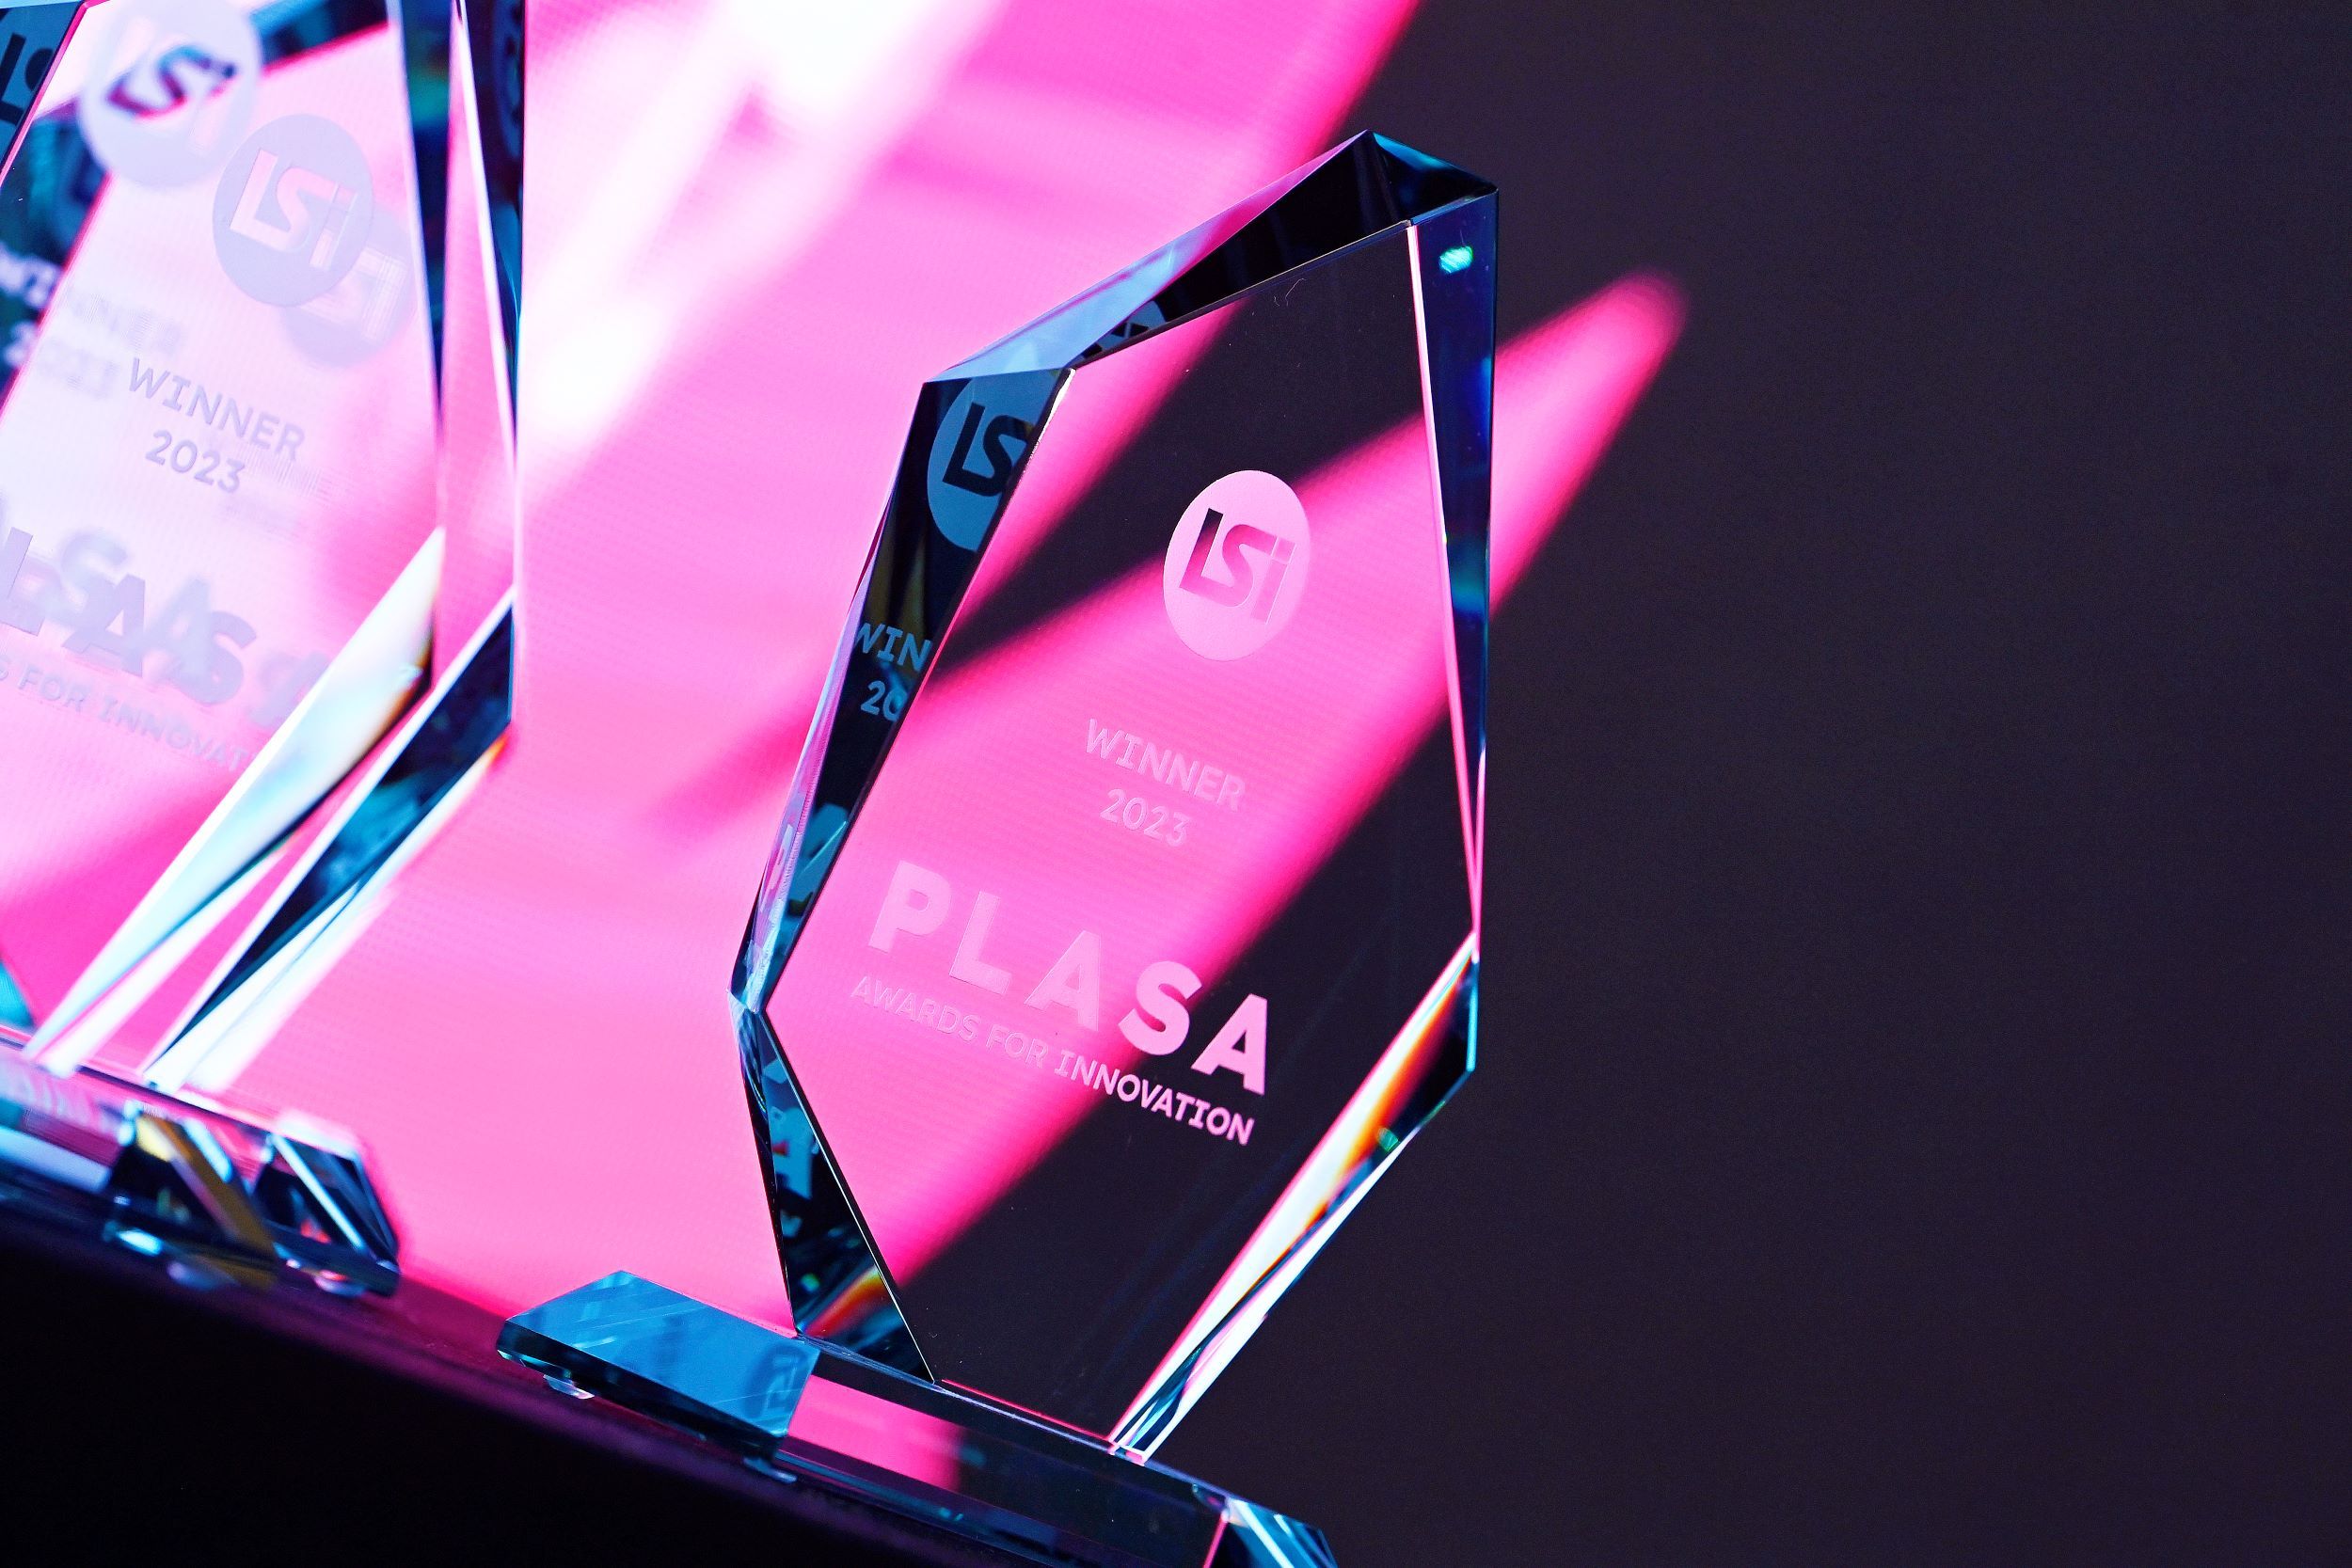 PLASA Awards for Innovation on display in London at the awards ceremony at Olympia London